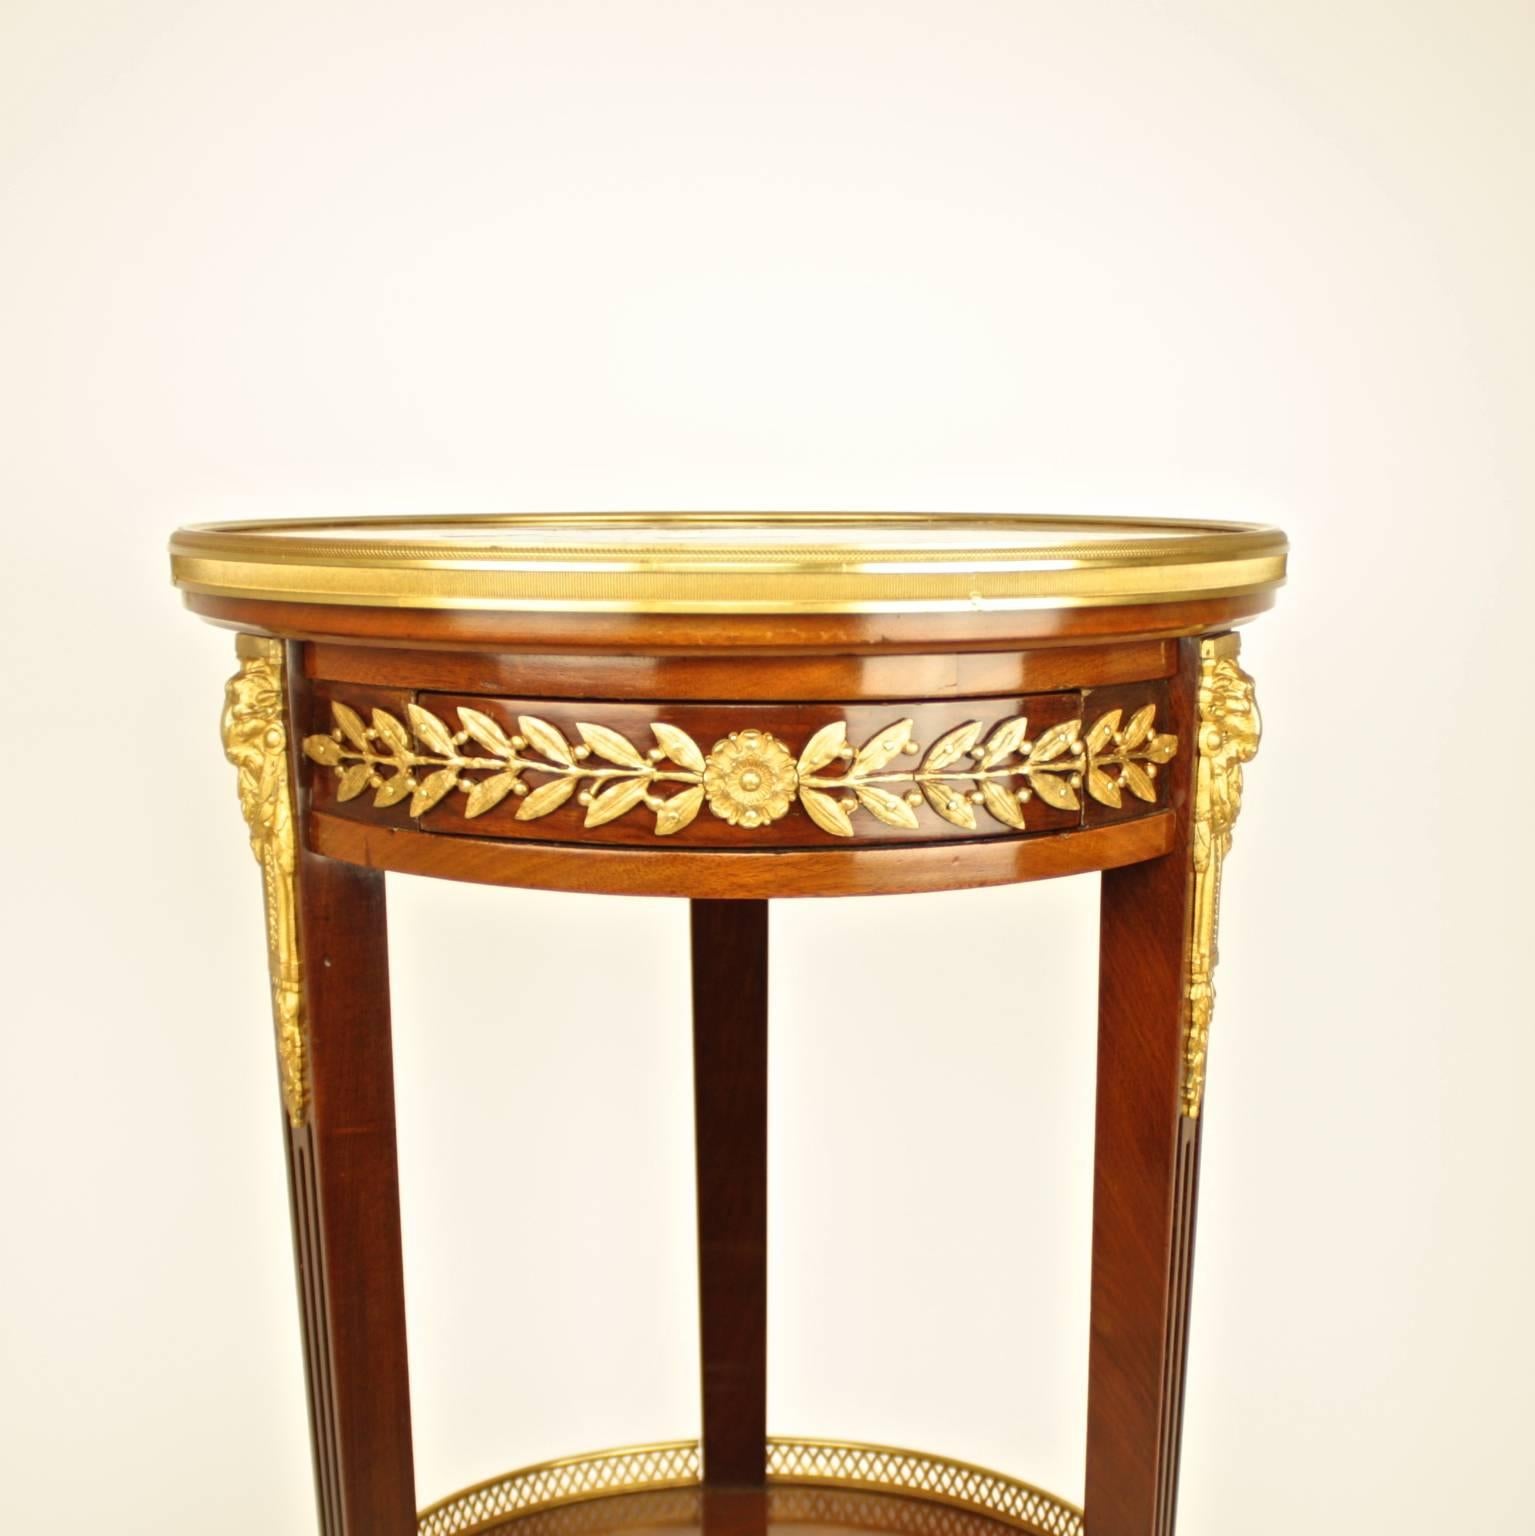 A fine pair of 19th century Louis XVI style gilt-bronze mounted two-tiered circular stand or guéridon, the circular breche d'alep red and ochre marble top framed by a pierced gilt bronze gallery above a gilt-bronze mounted frieze depicting paterae